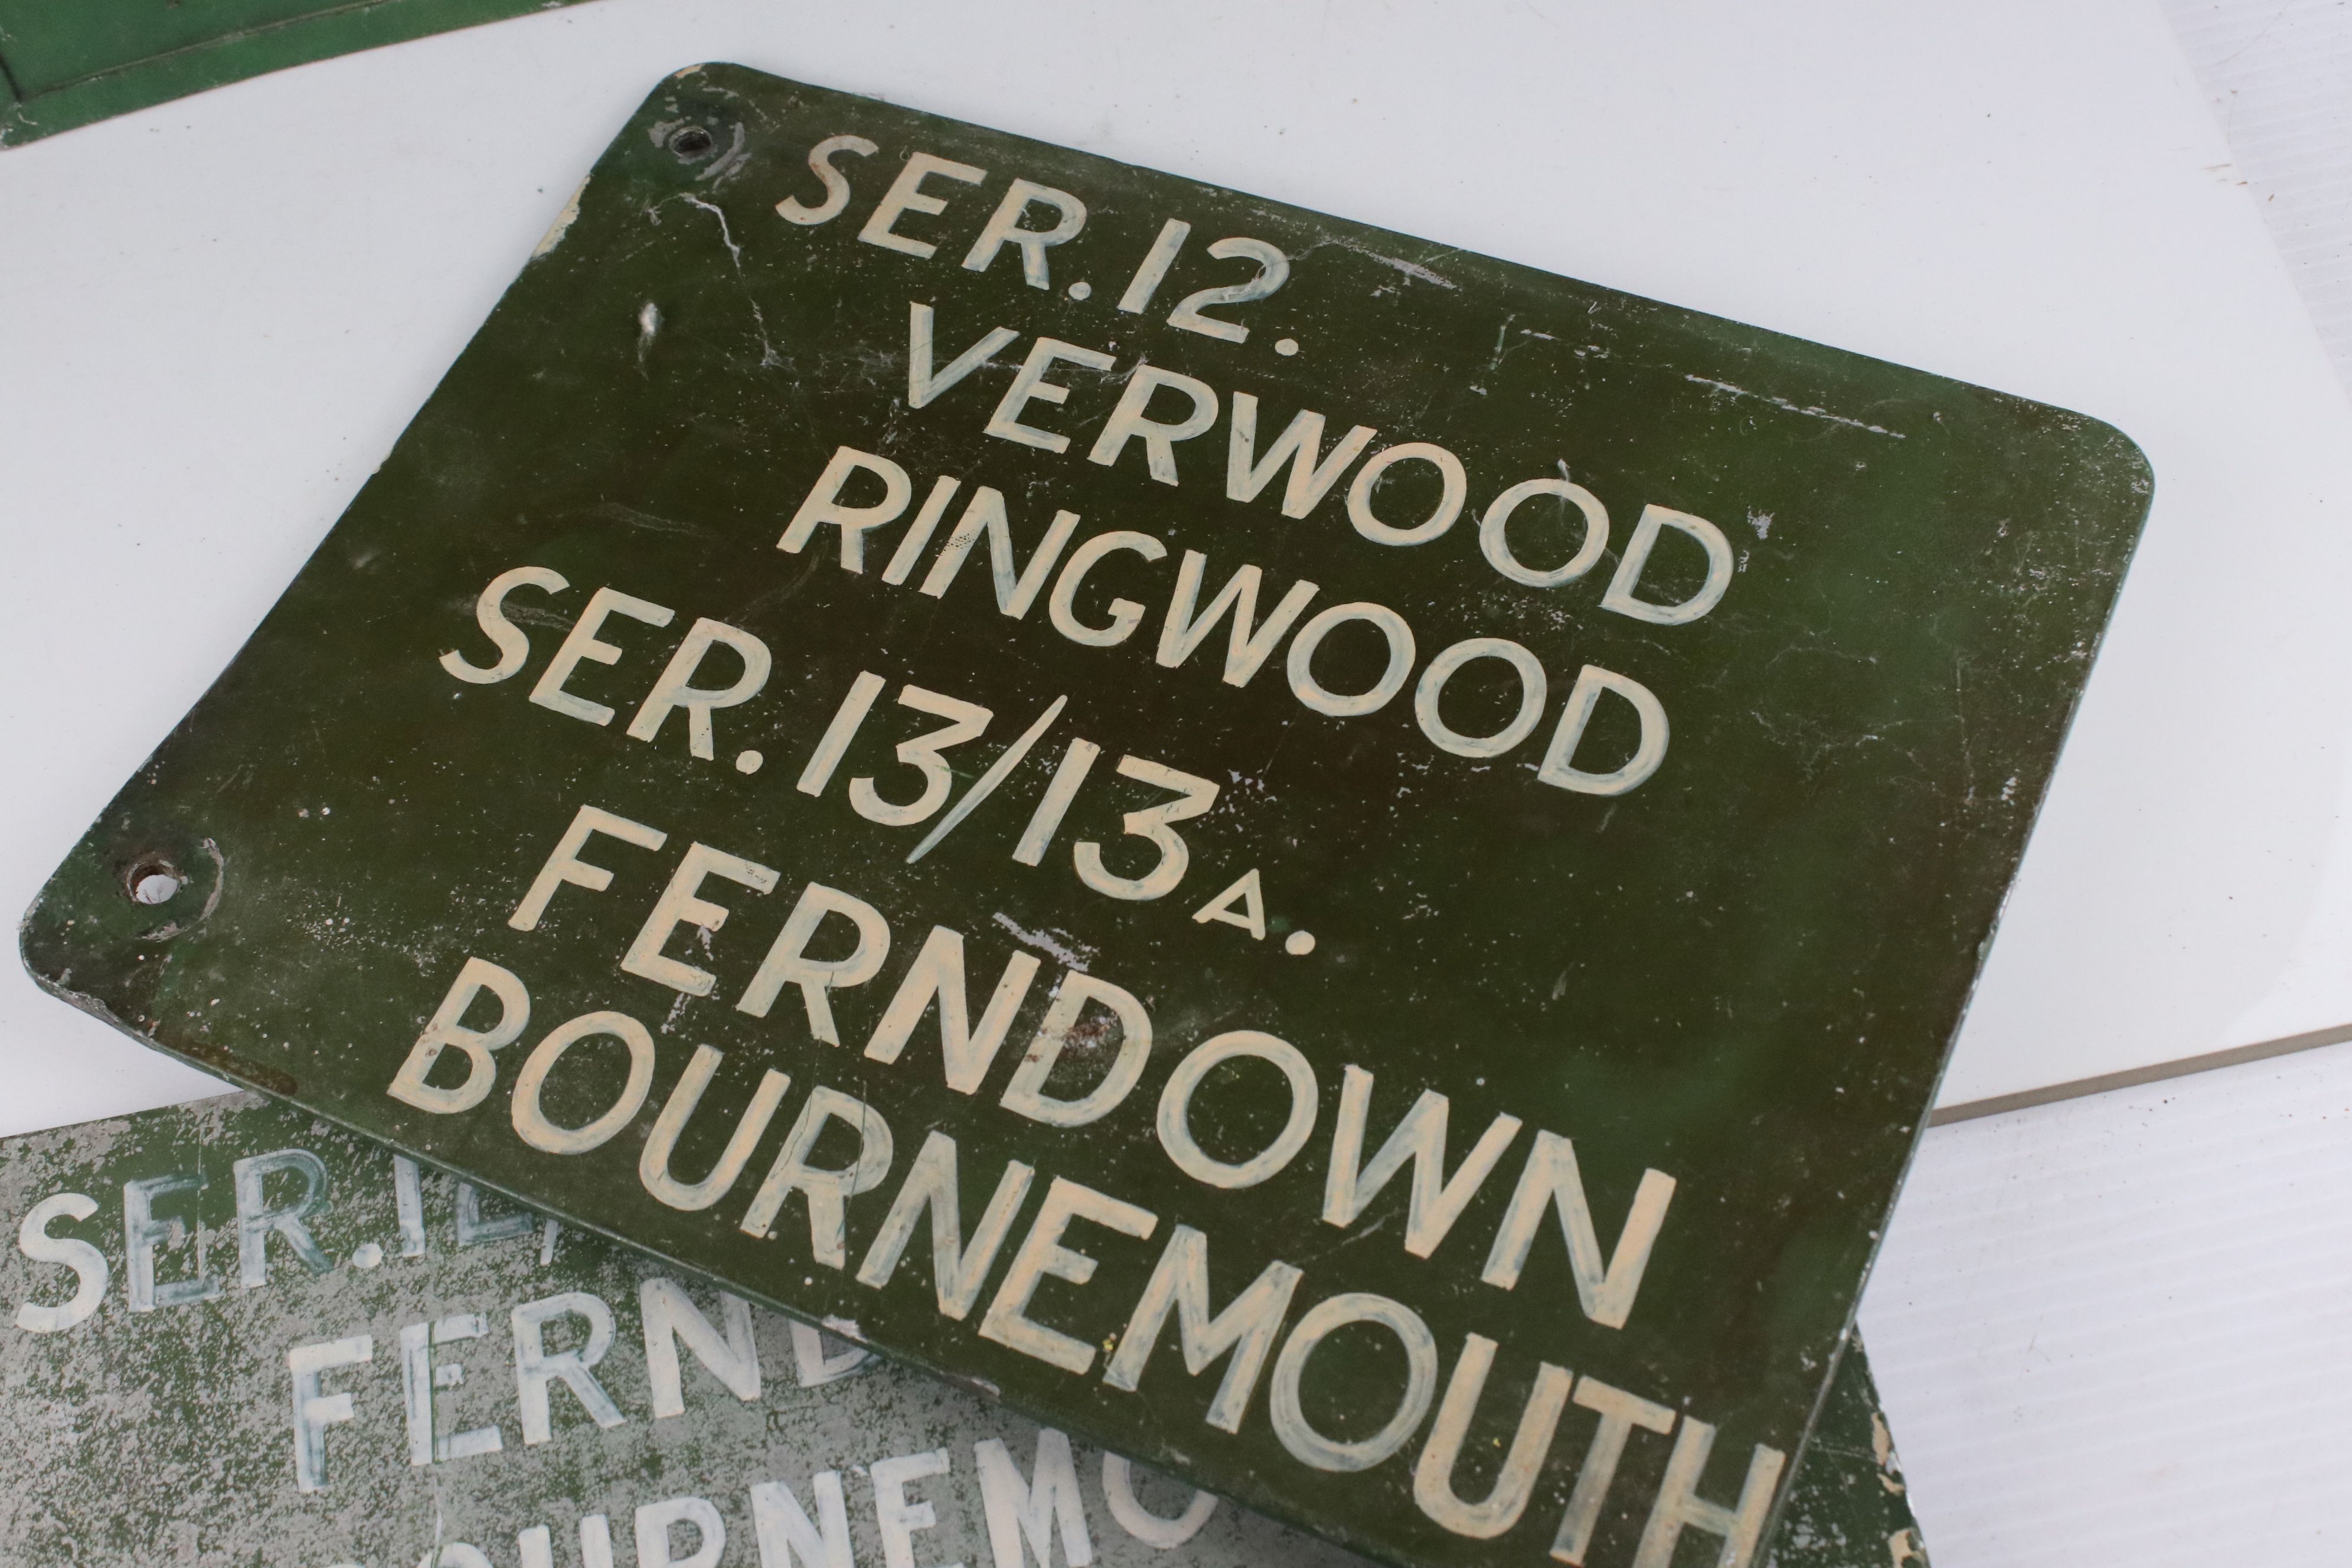 Three Mid 20th century Double Sided Metal Bus Service Signs covering Ferndown, Bournemouth, - Image 7 of 9